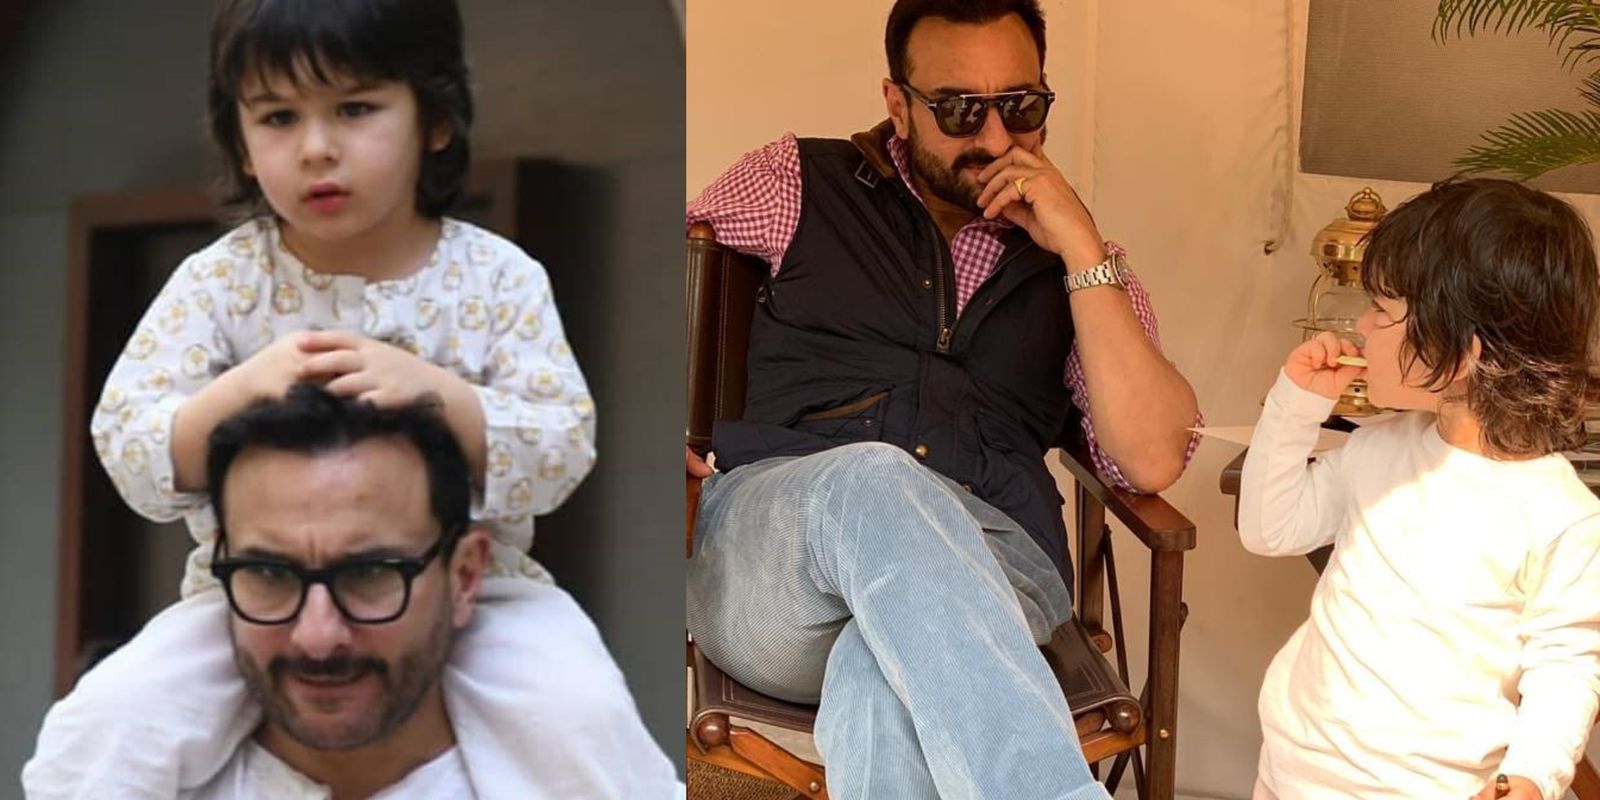 Saif Ali Khan On Taimur’s Popularity: ‘This Star Kid Is A Tag That Just Falls On You, Whether You Like It Or Not’